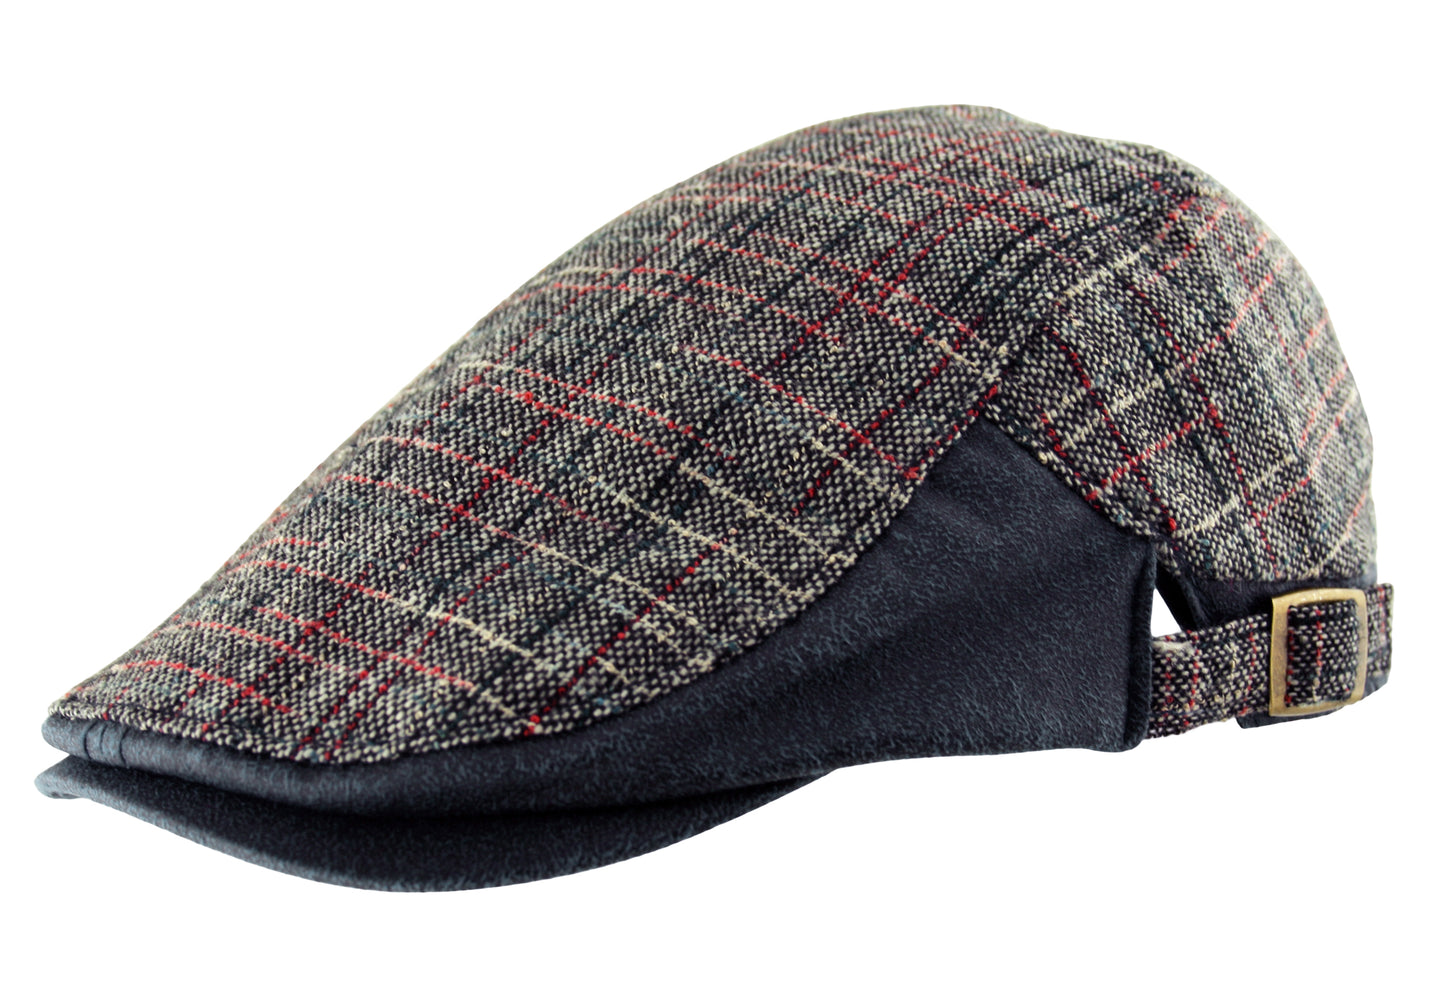 Faux Leather Tweed Check Cotton Newsboy Flat Cap in Navy Blue